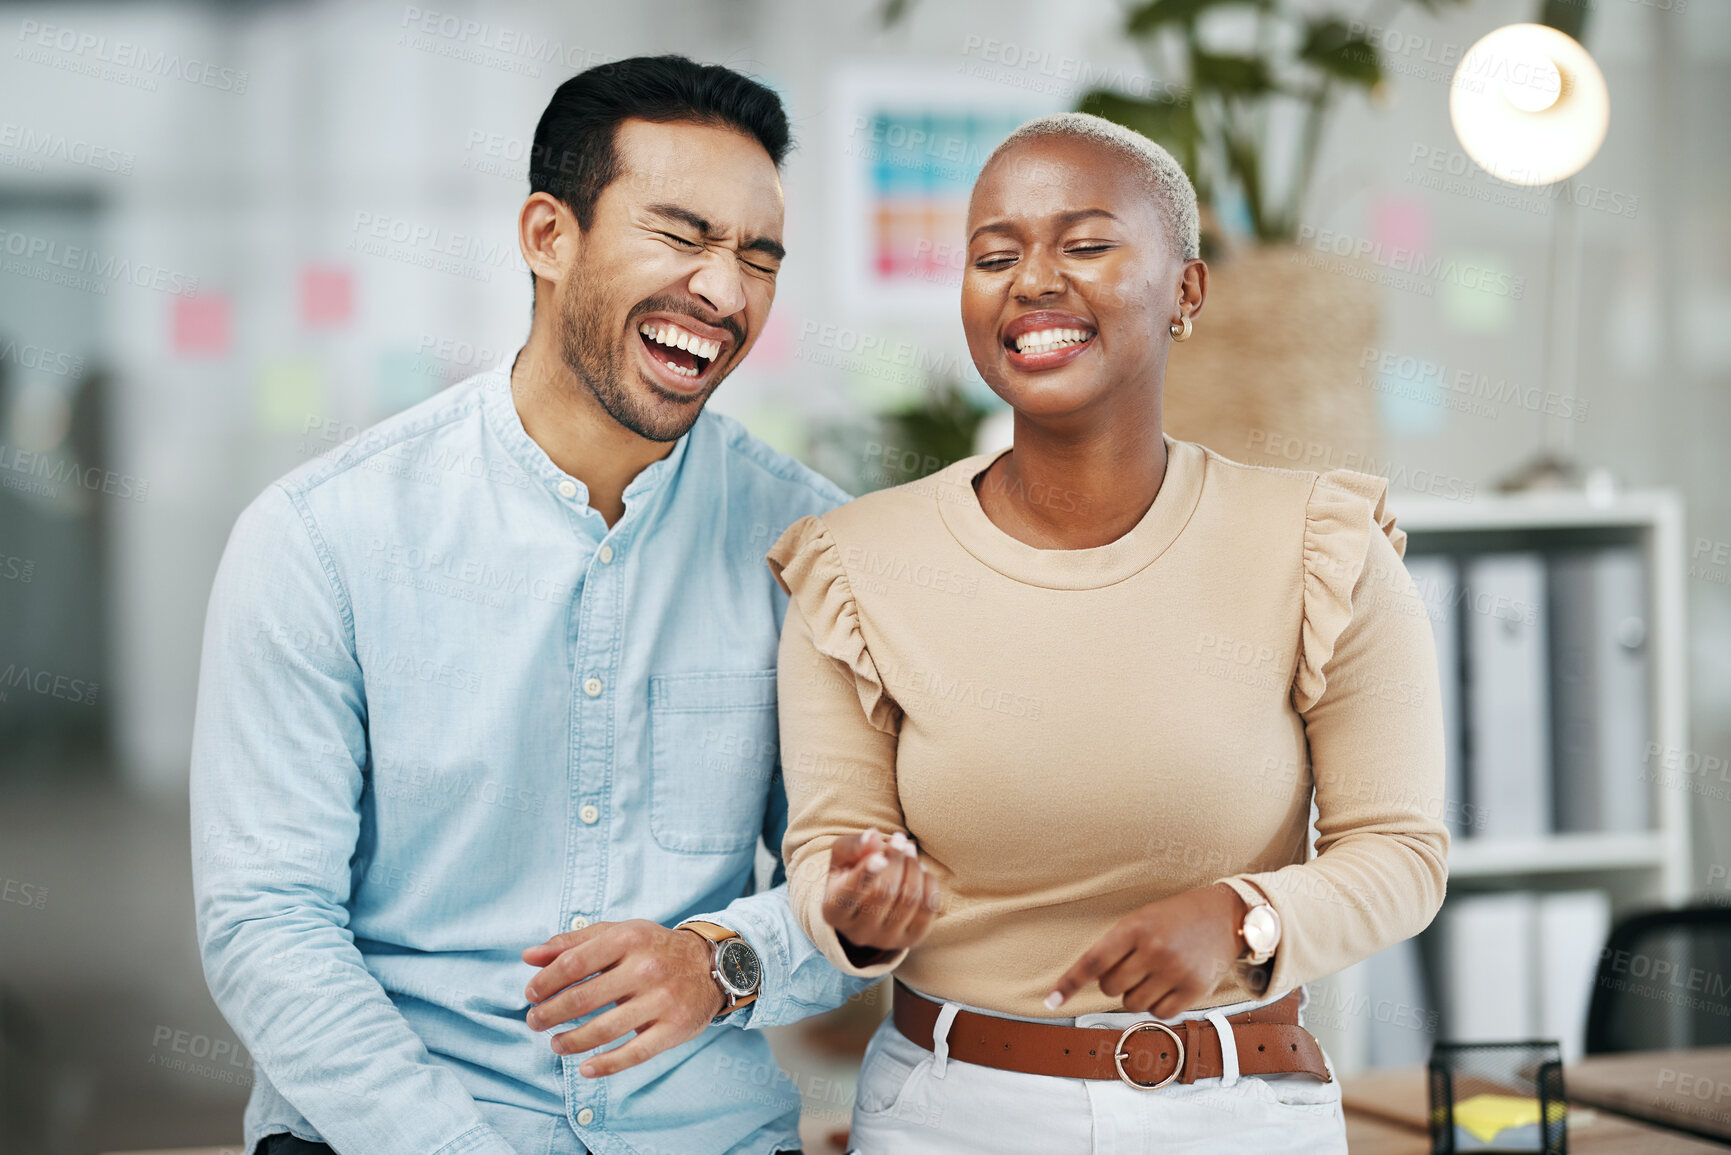 Buy stock photo Work, professional team and laughing in a office with employee group and happiness. Motivation, teamwork and diversity of business friends together with a happy smile and funny joke at workplace